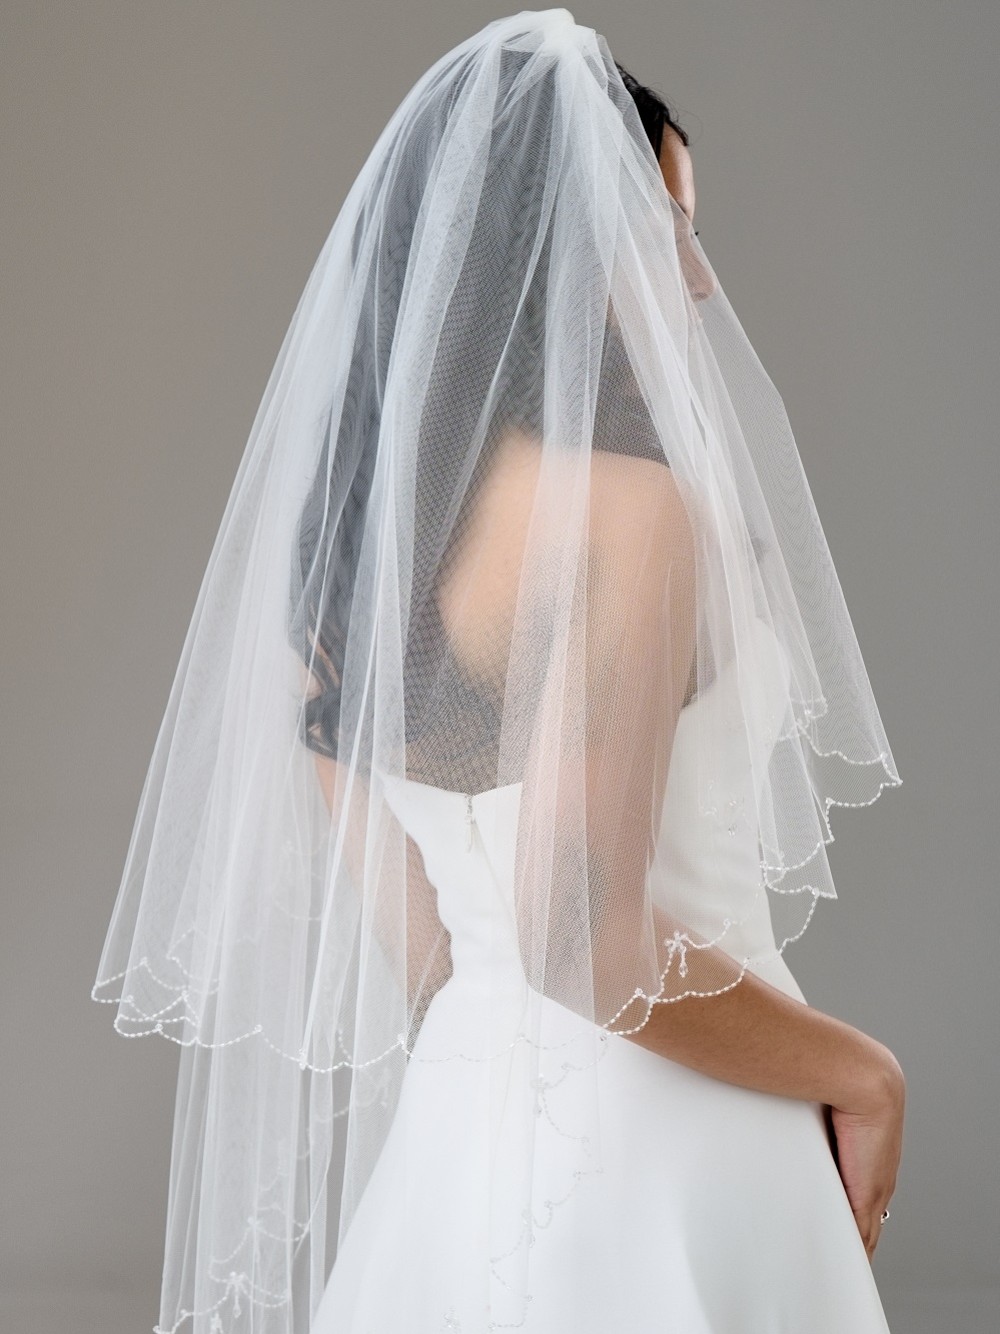 Photograph: Atlanta Two Tier Beaded Scalloped Edge Veil with Crystal Drops